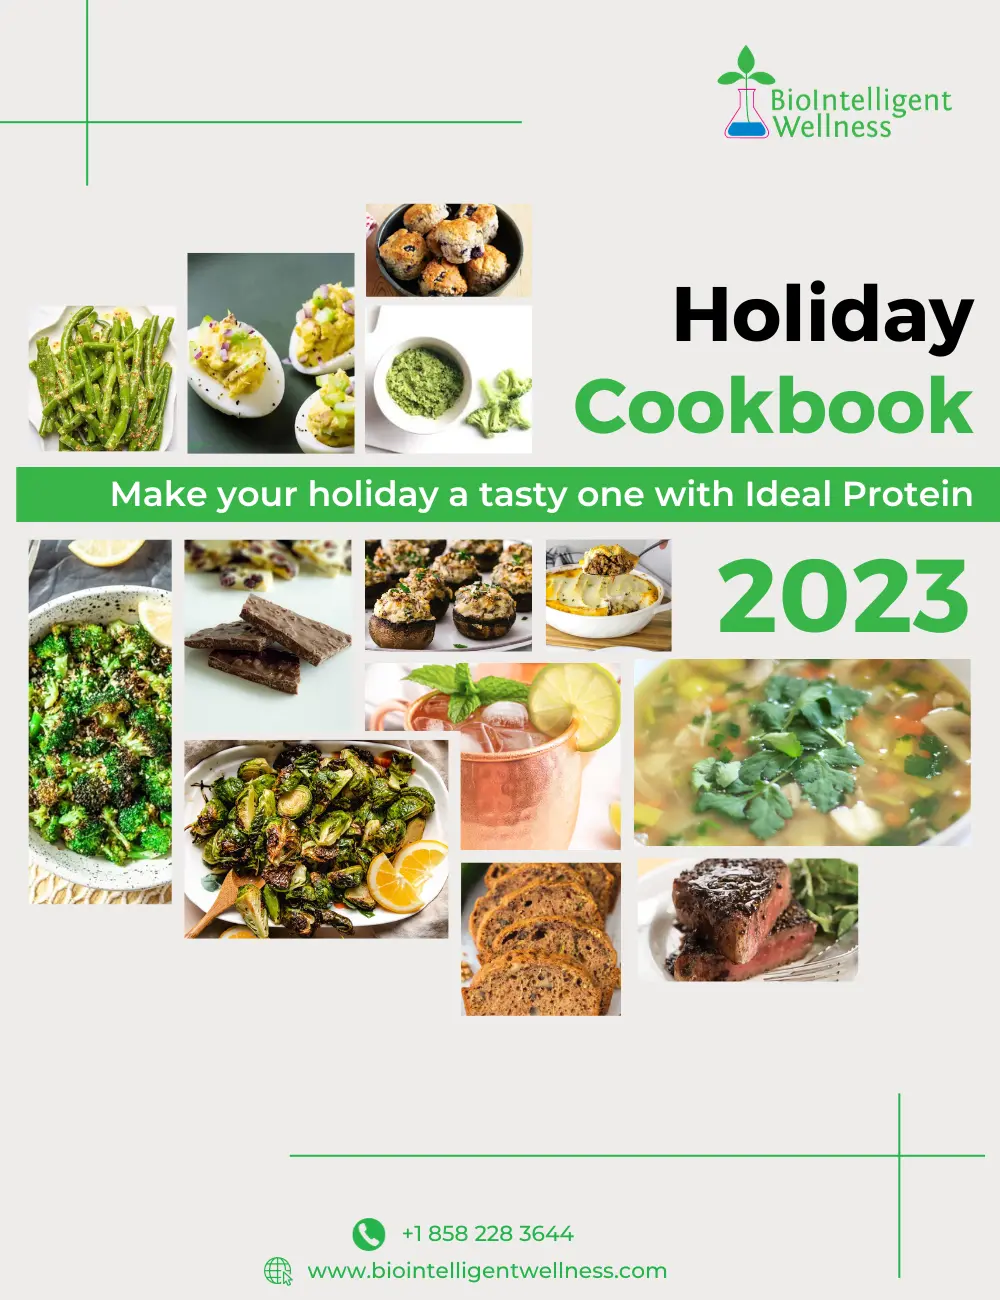 Ideal Protein Holiday Cookbook